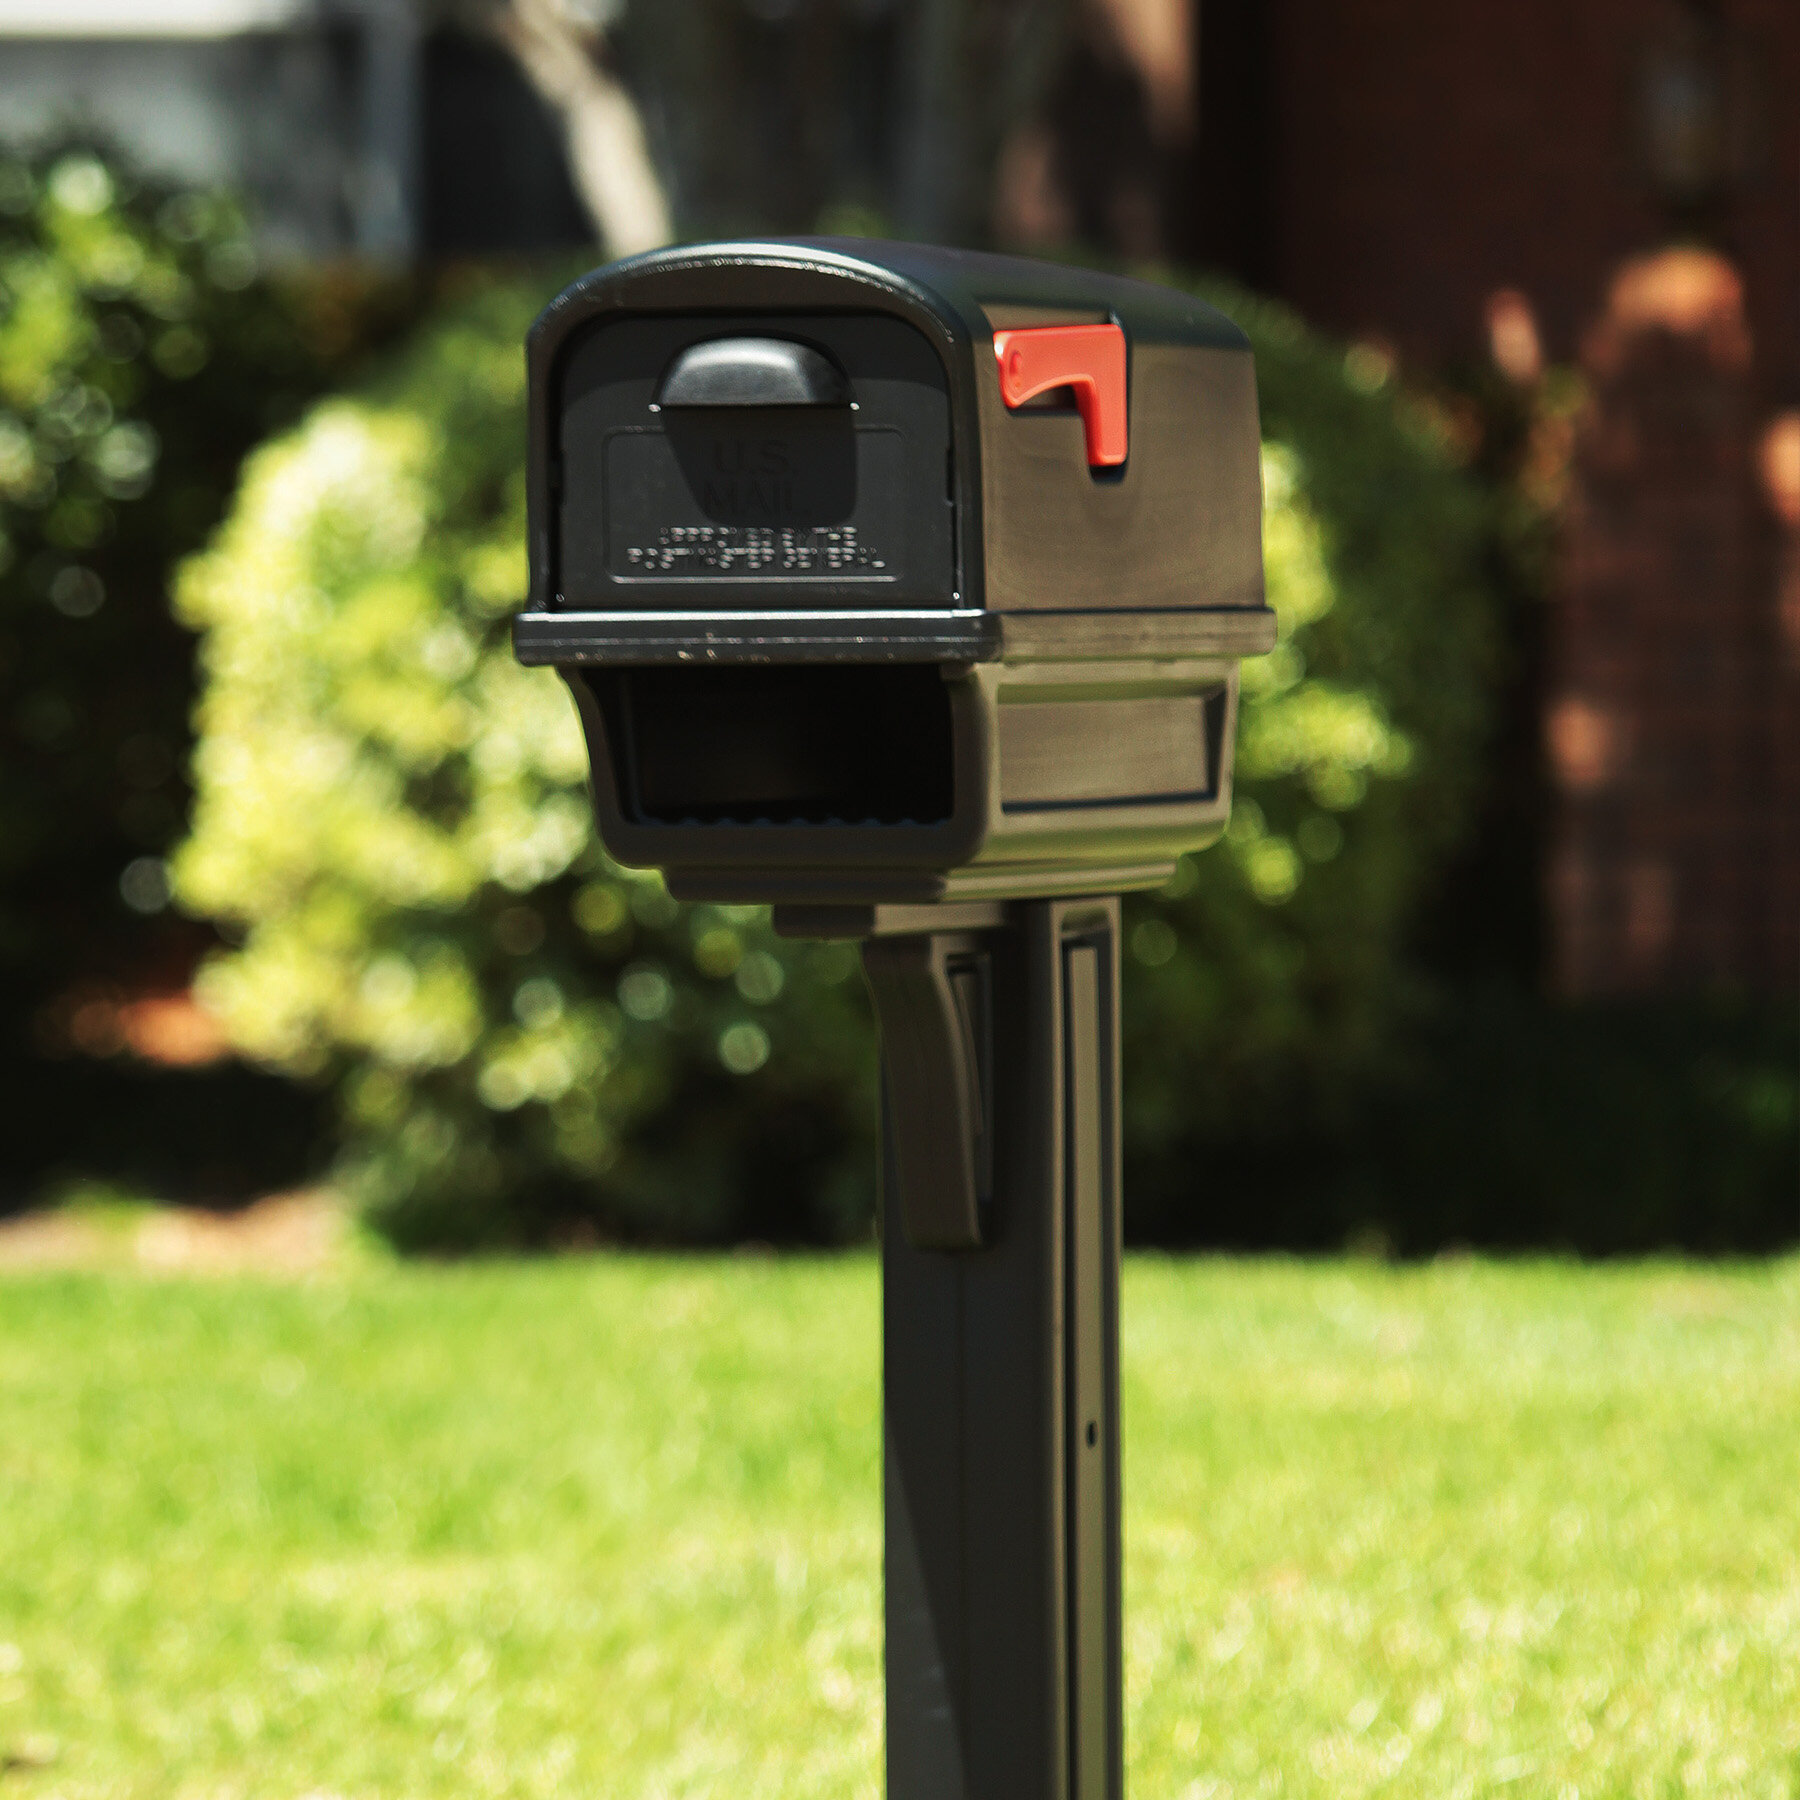 GIBRALTAR Plastic Mailbox Post Combo Large Capacity Black Residential Mail Box